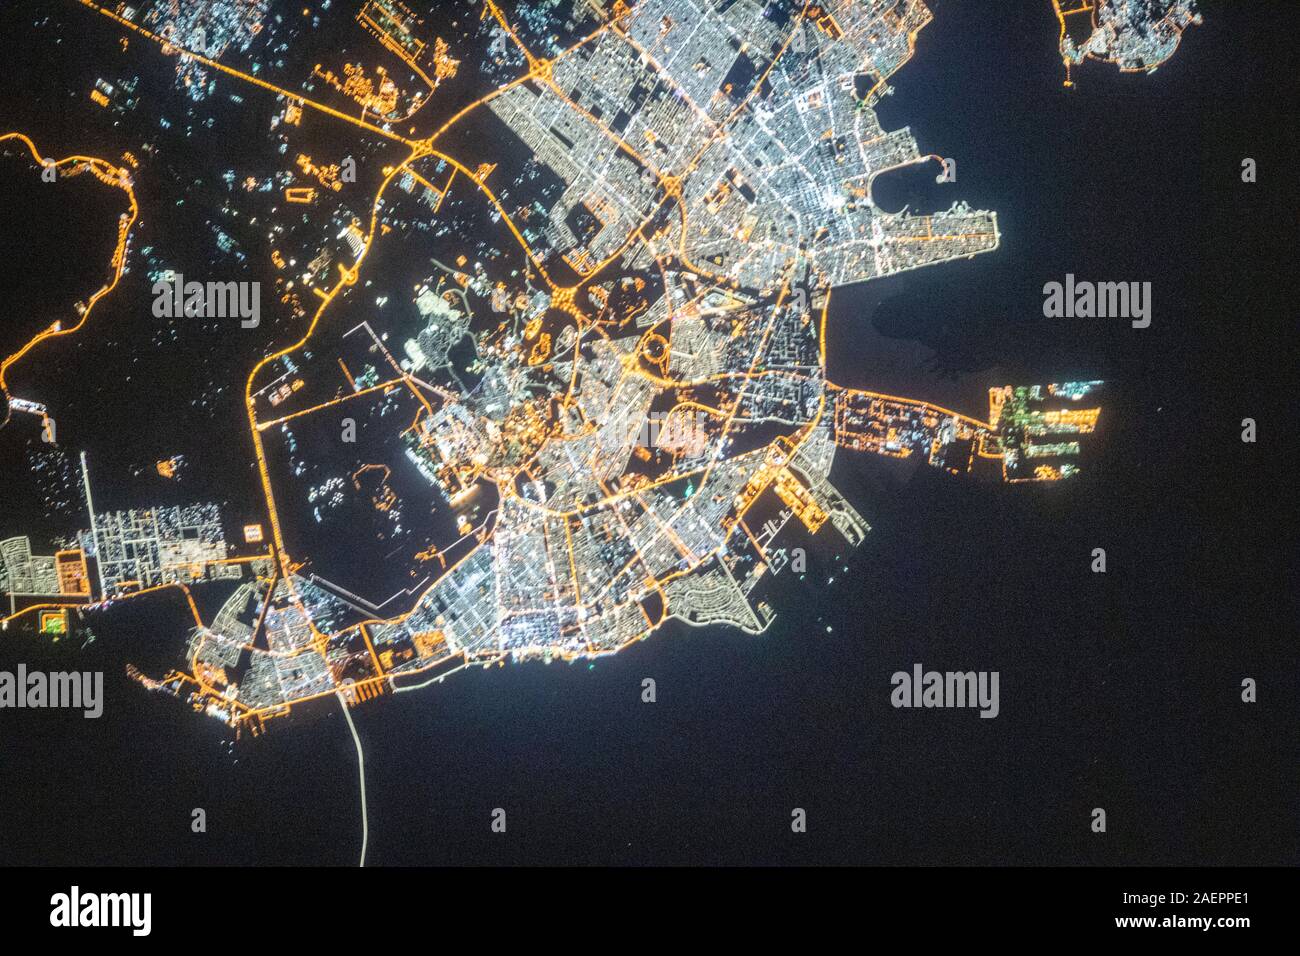 A nighttime view of Dammam, Saudi Arabia as seem from the International Space Station orbiting 262 miles above the port city December 3, 2019 in Earth Orbit. The fork-like structure at right is the King Abdulaziz Seaport. Stock Photo